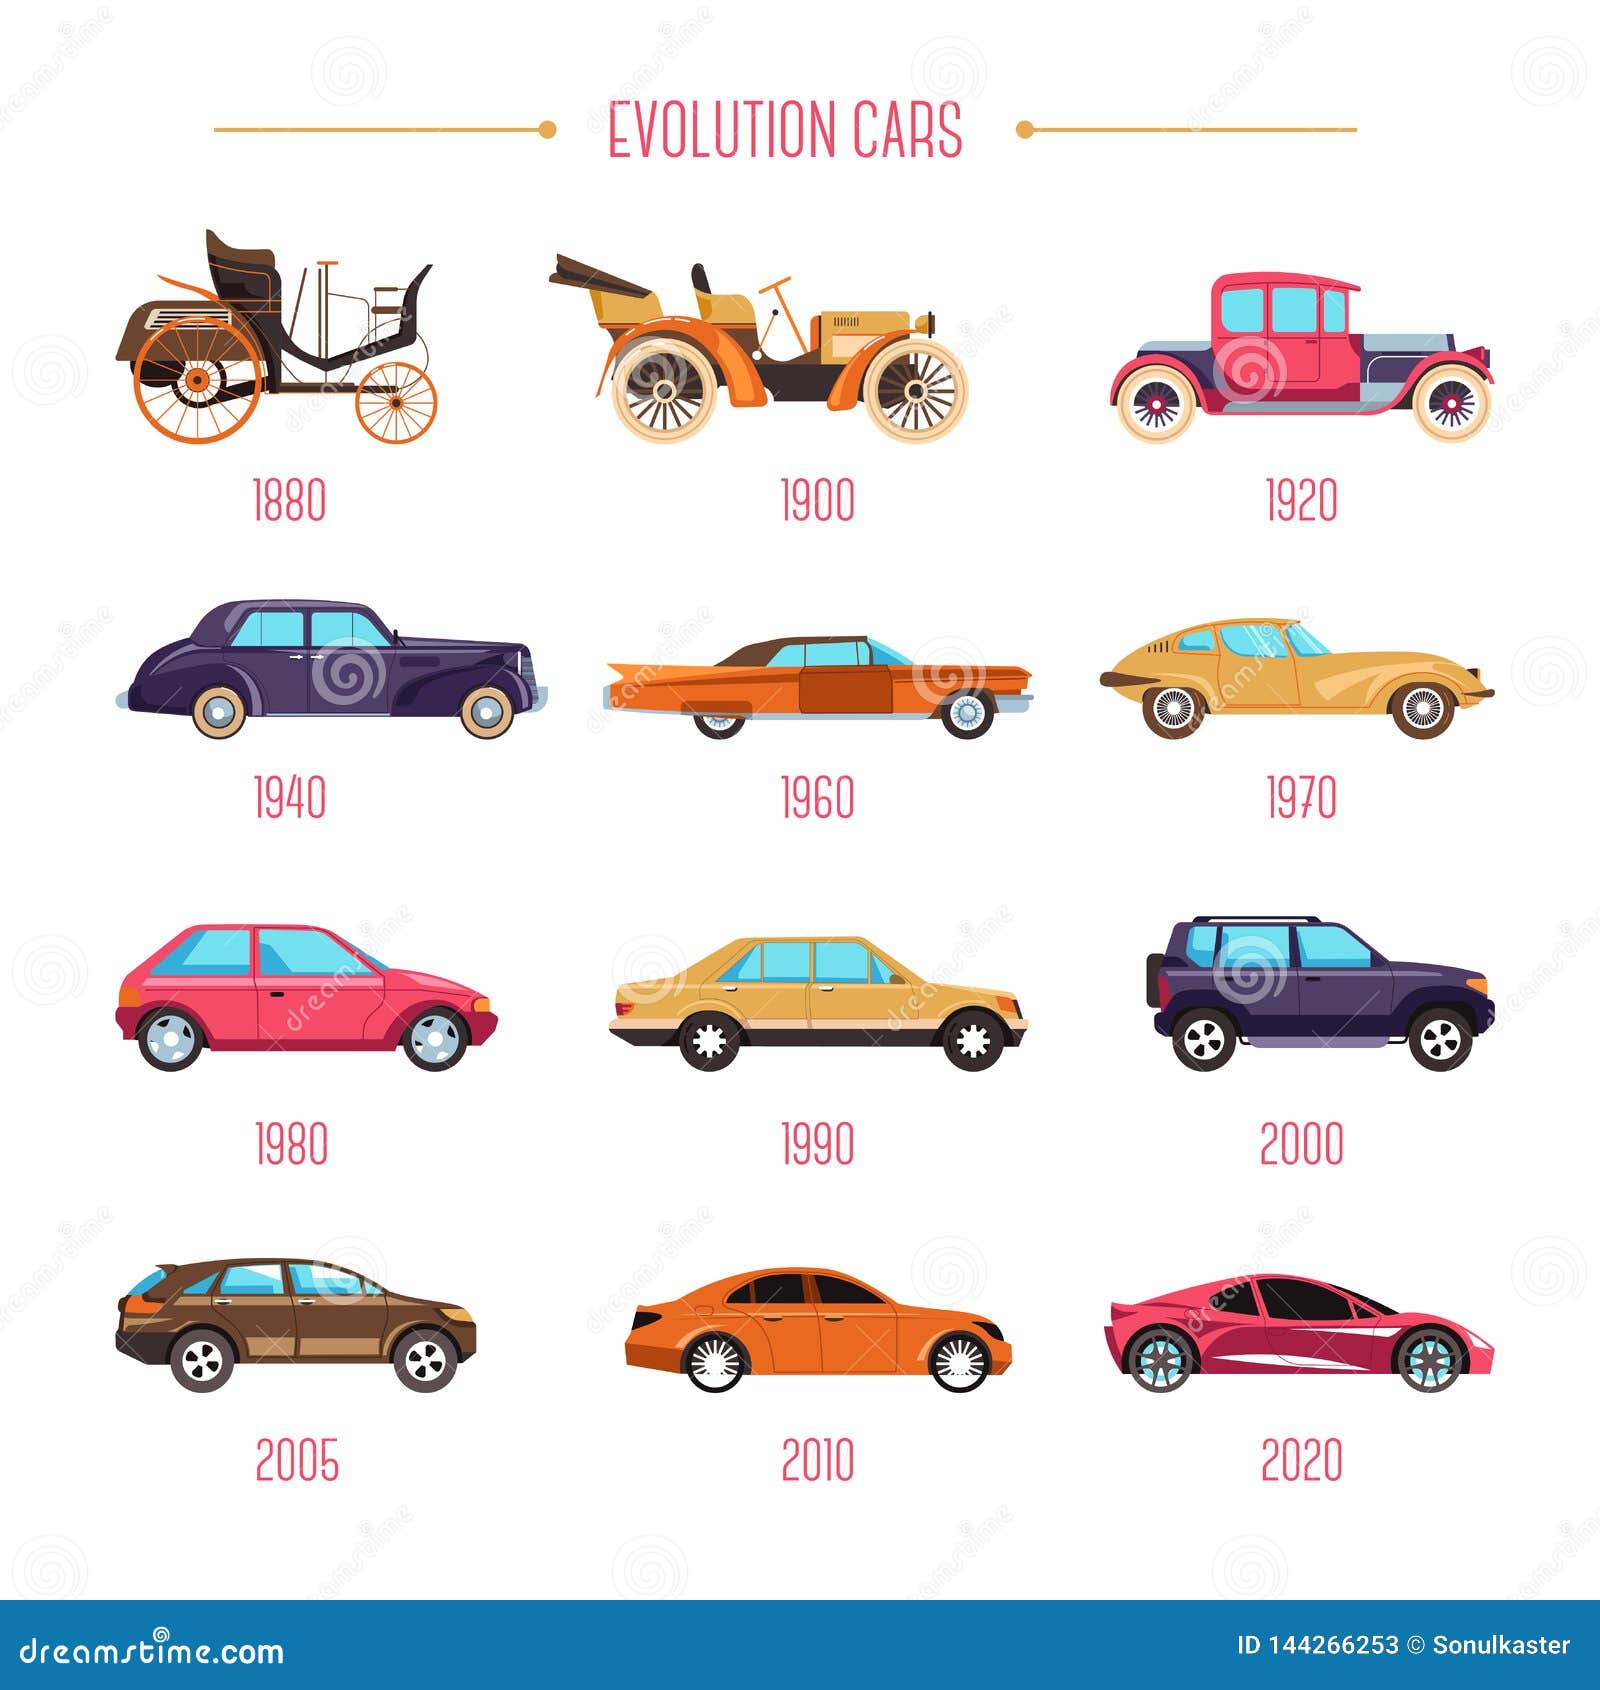 the first car in the world car history history of the automobile cars in the 1920s automobiles in the 1920s historic cars brief history of cars automobile invention the first car invented the history of cars auto history 1900s cars car brands and country of origin car invented year first car invented year inventor of motor car ford car history citroen cars history history of cars for kids origin of the word car history of hybrid cars cars in the 1980s history history of automobile industry the first car made